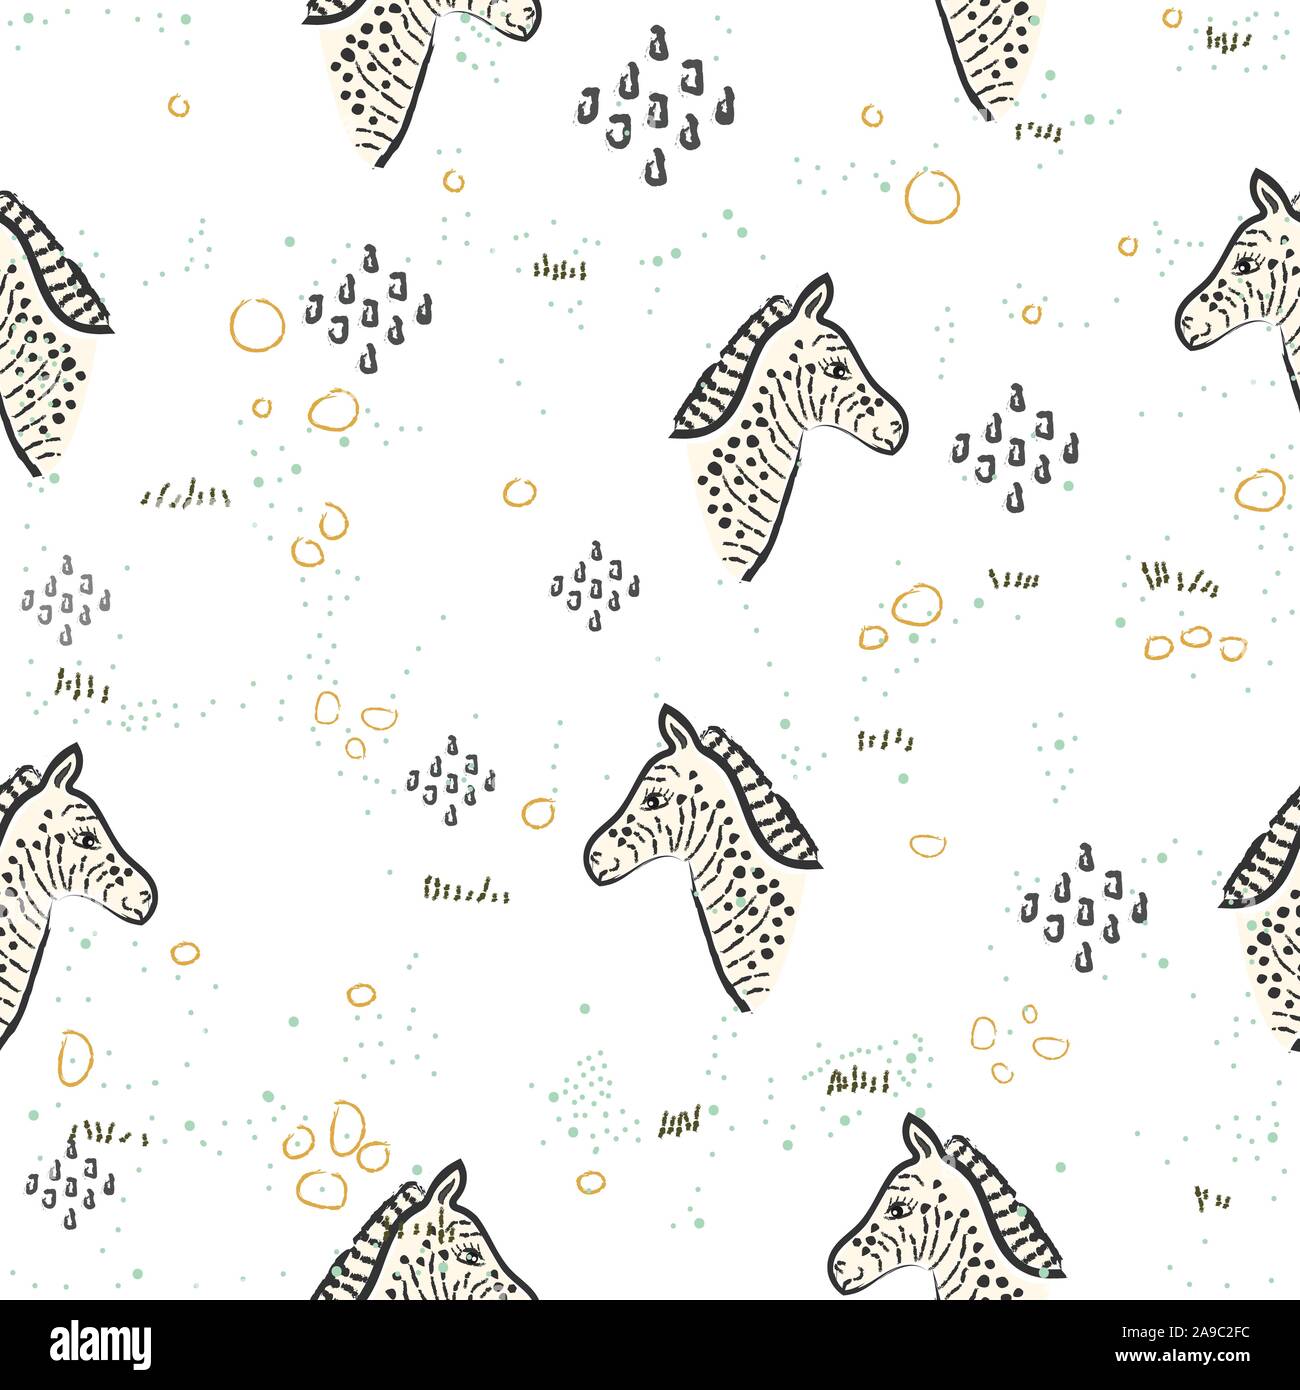 Seamless Pattern With Cute Hand Drawn Heads of Zebras. Scandinavian Style Stock Vector